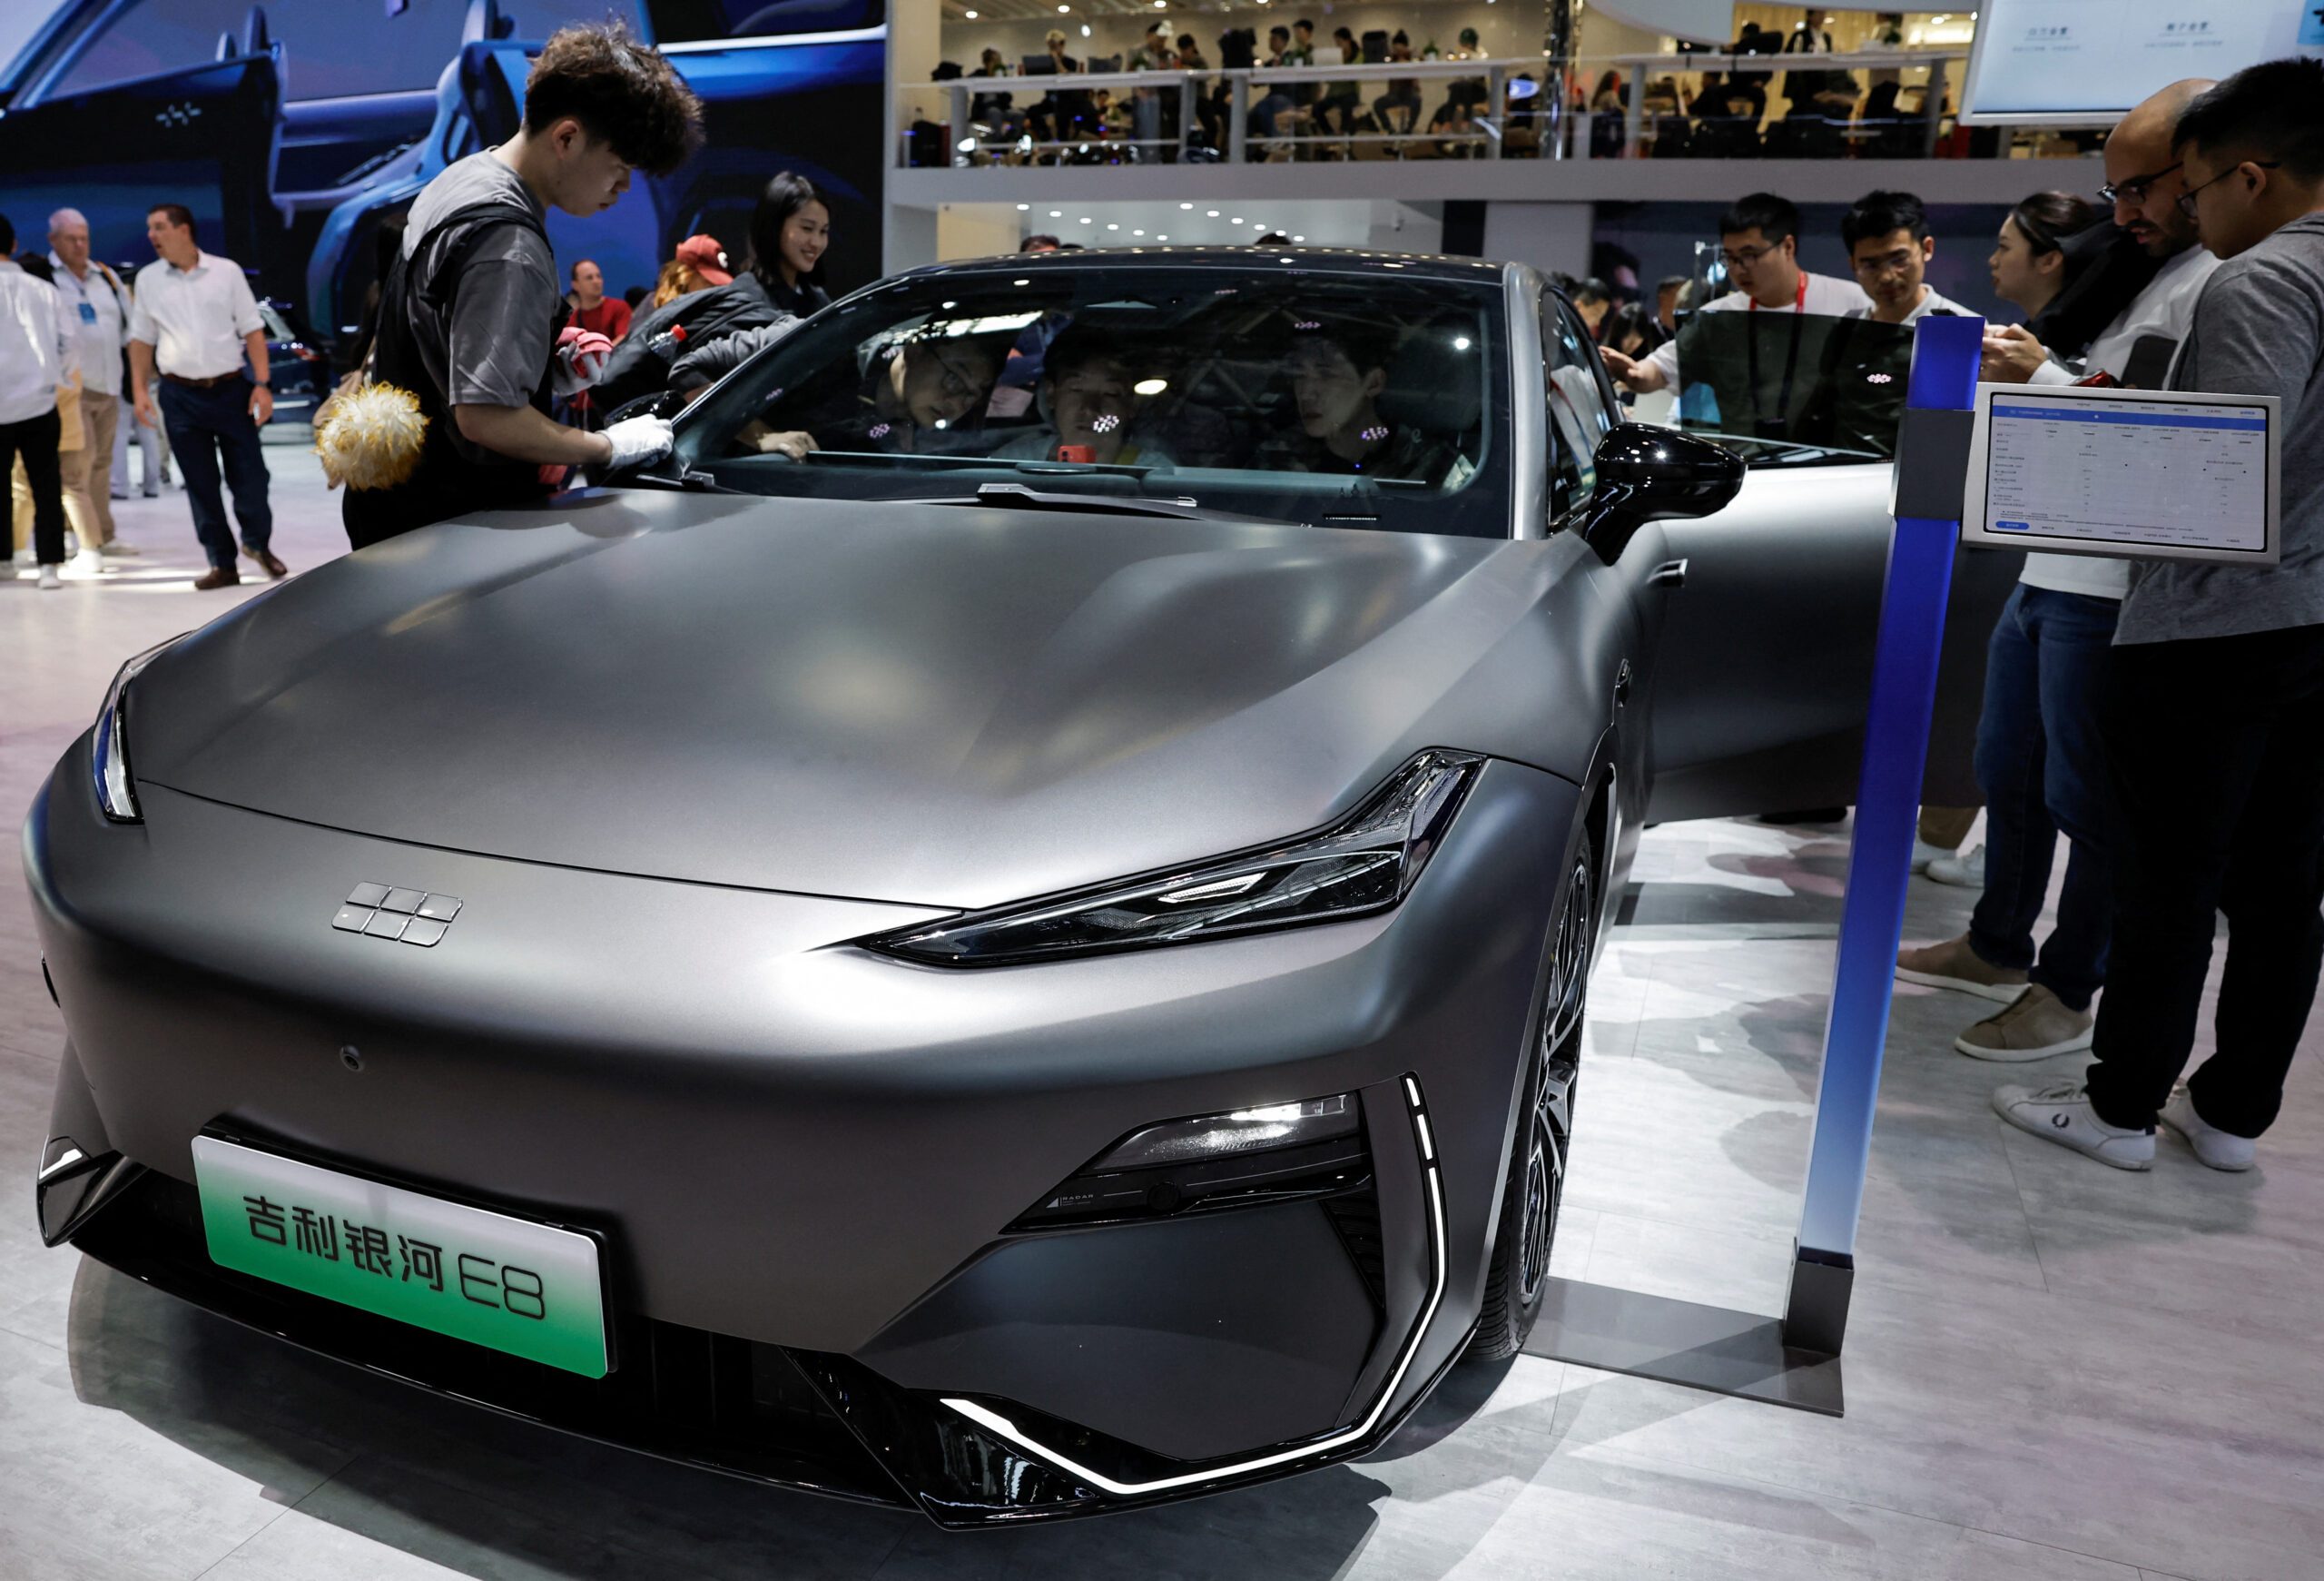 A Geely Galaxy E8 electric vehicle at Auto China 2024. Geely is one of the most popular Chinese car brands in the Gulf